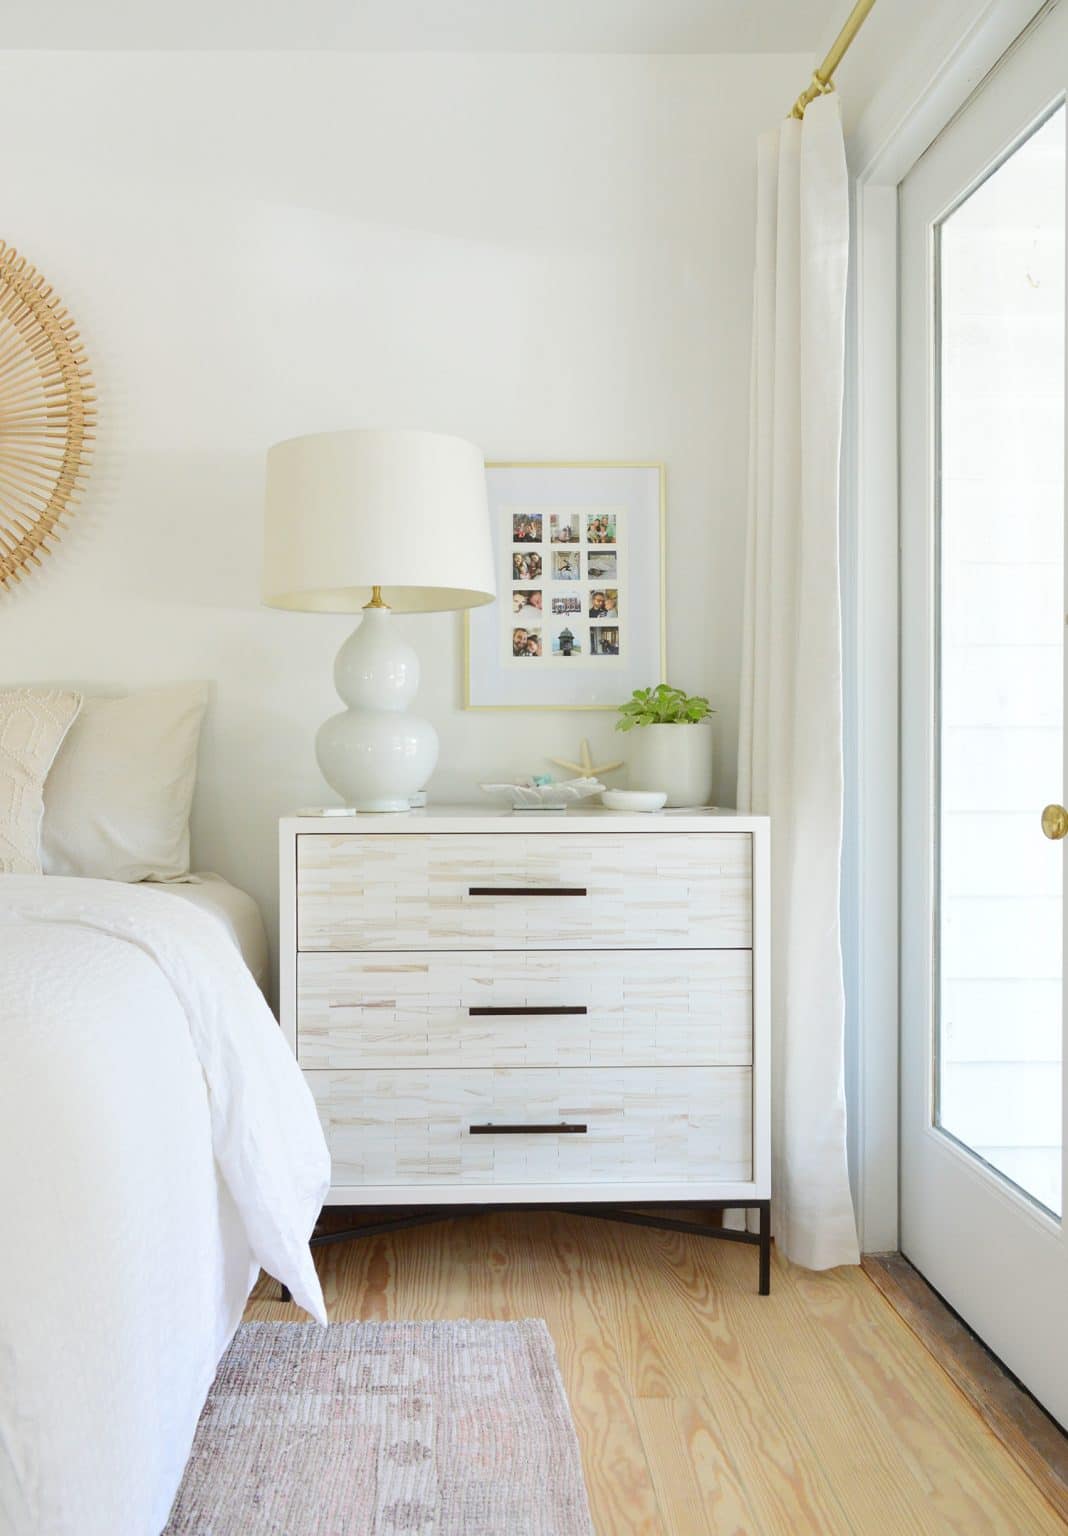 Recent Bedroom Updates (And What We've Got Planned) | Young House Love